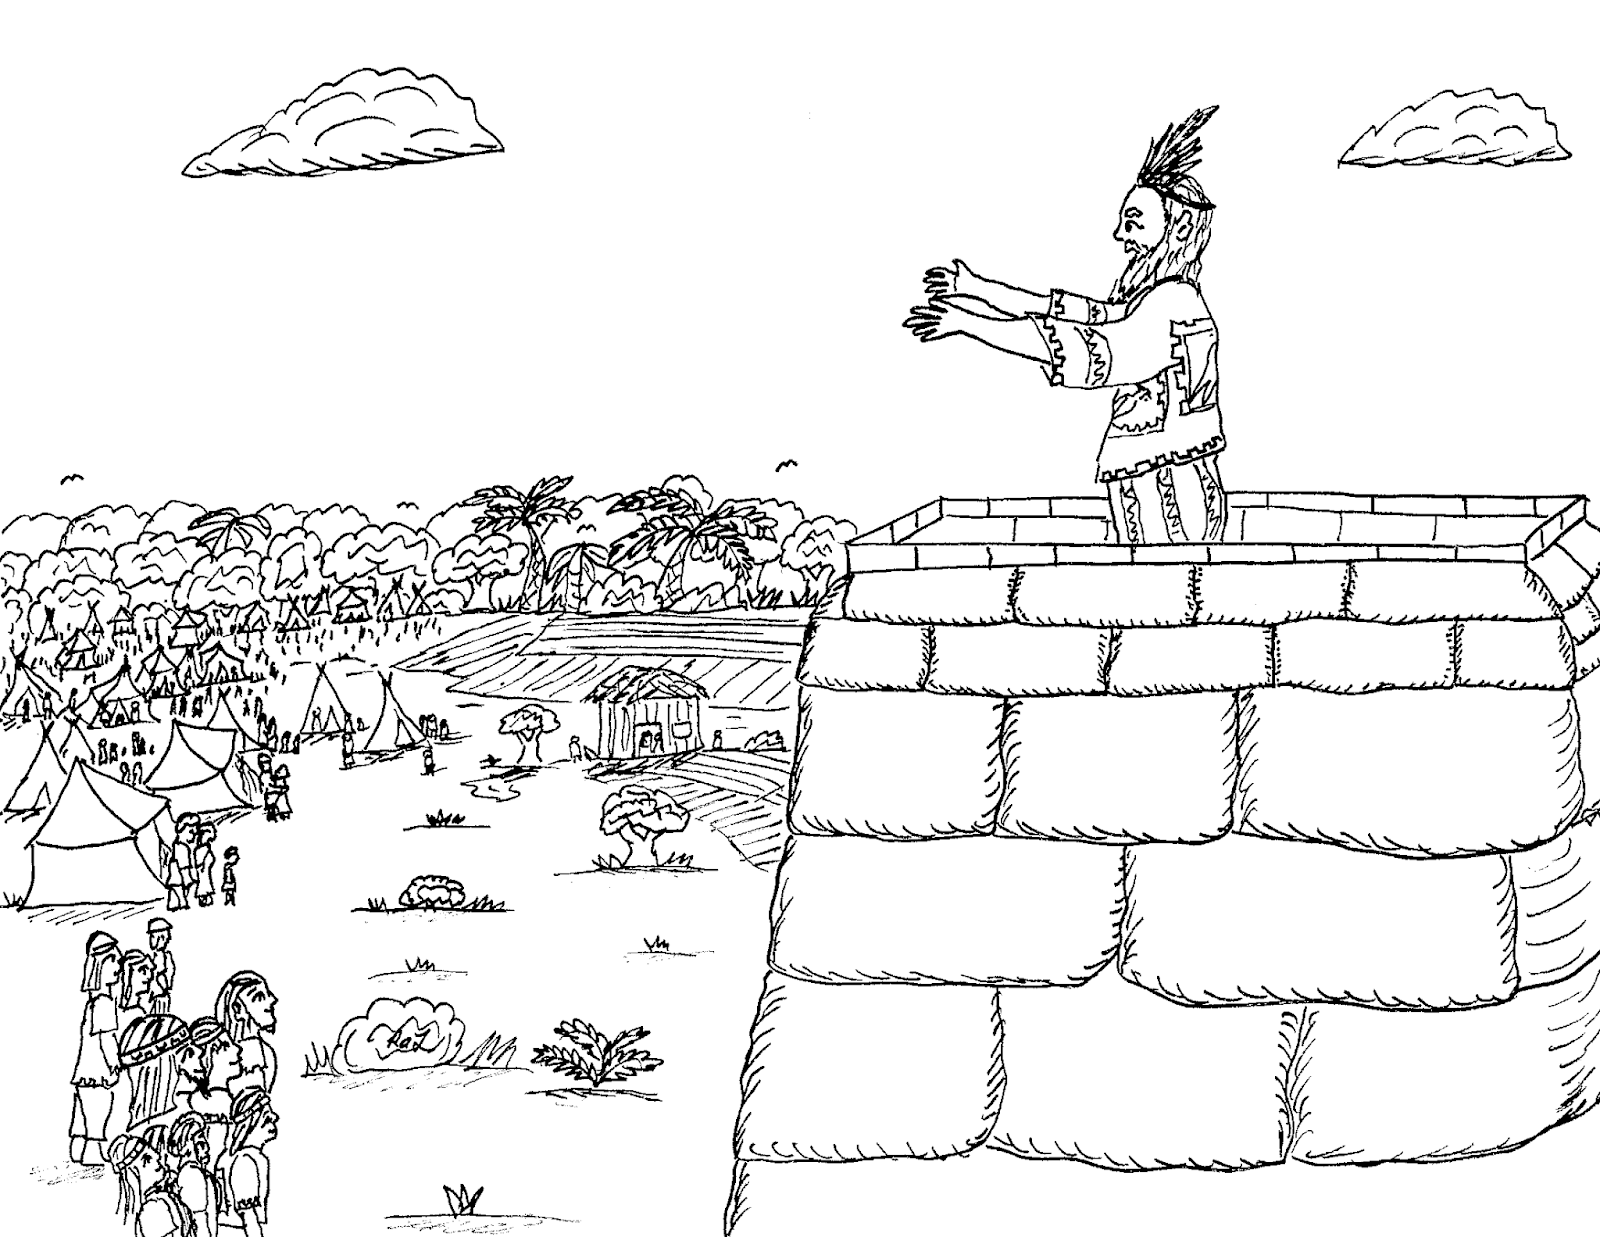 Robin's Great Coloring Pages: King Benjamin teaches His People, two